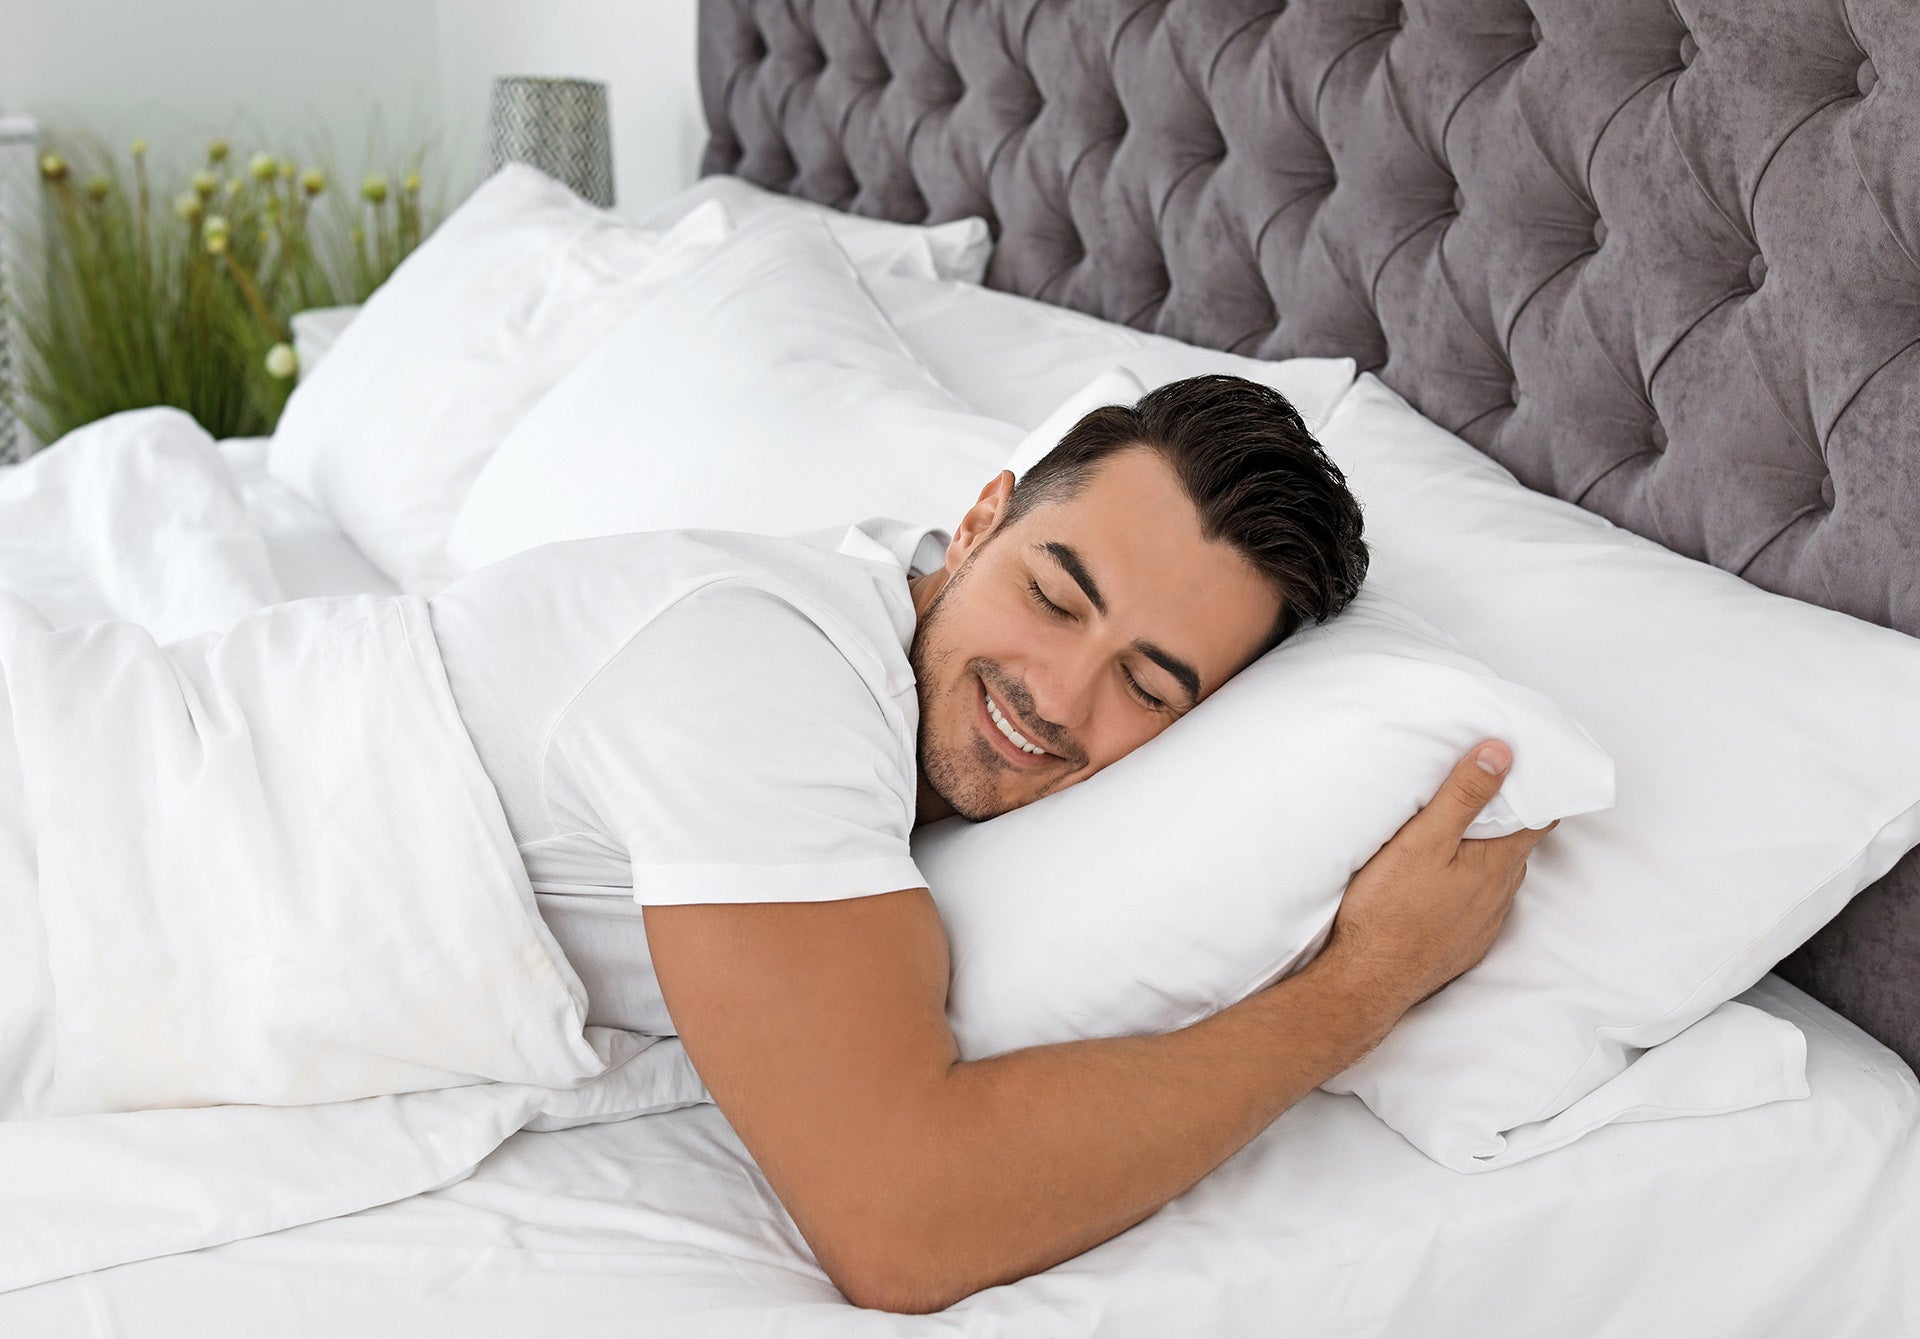 A man resting comfortably in bed, holding a pillow